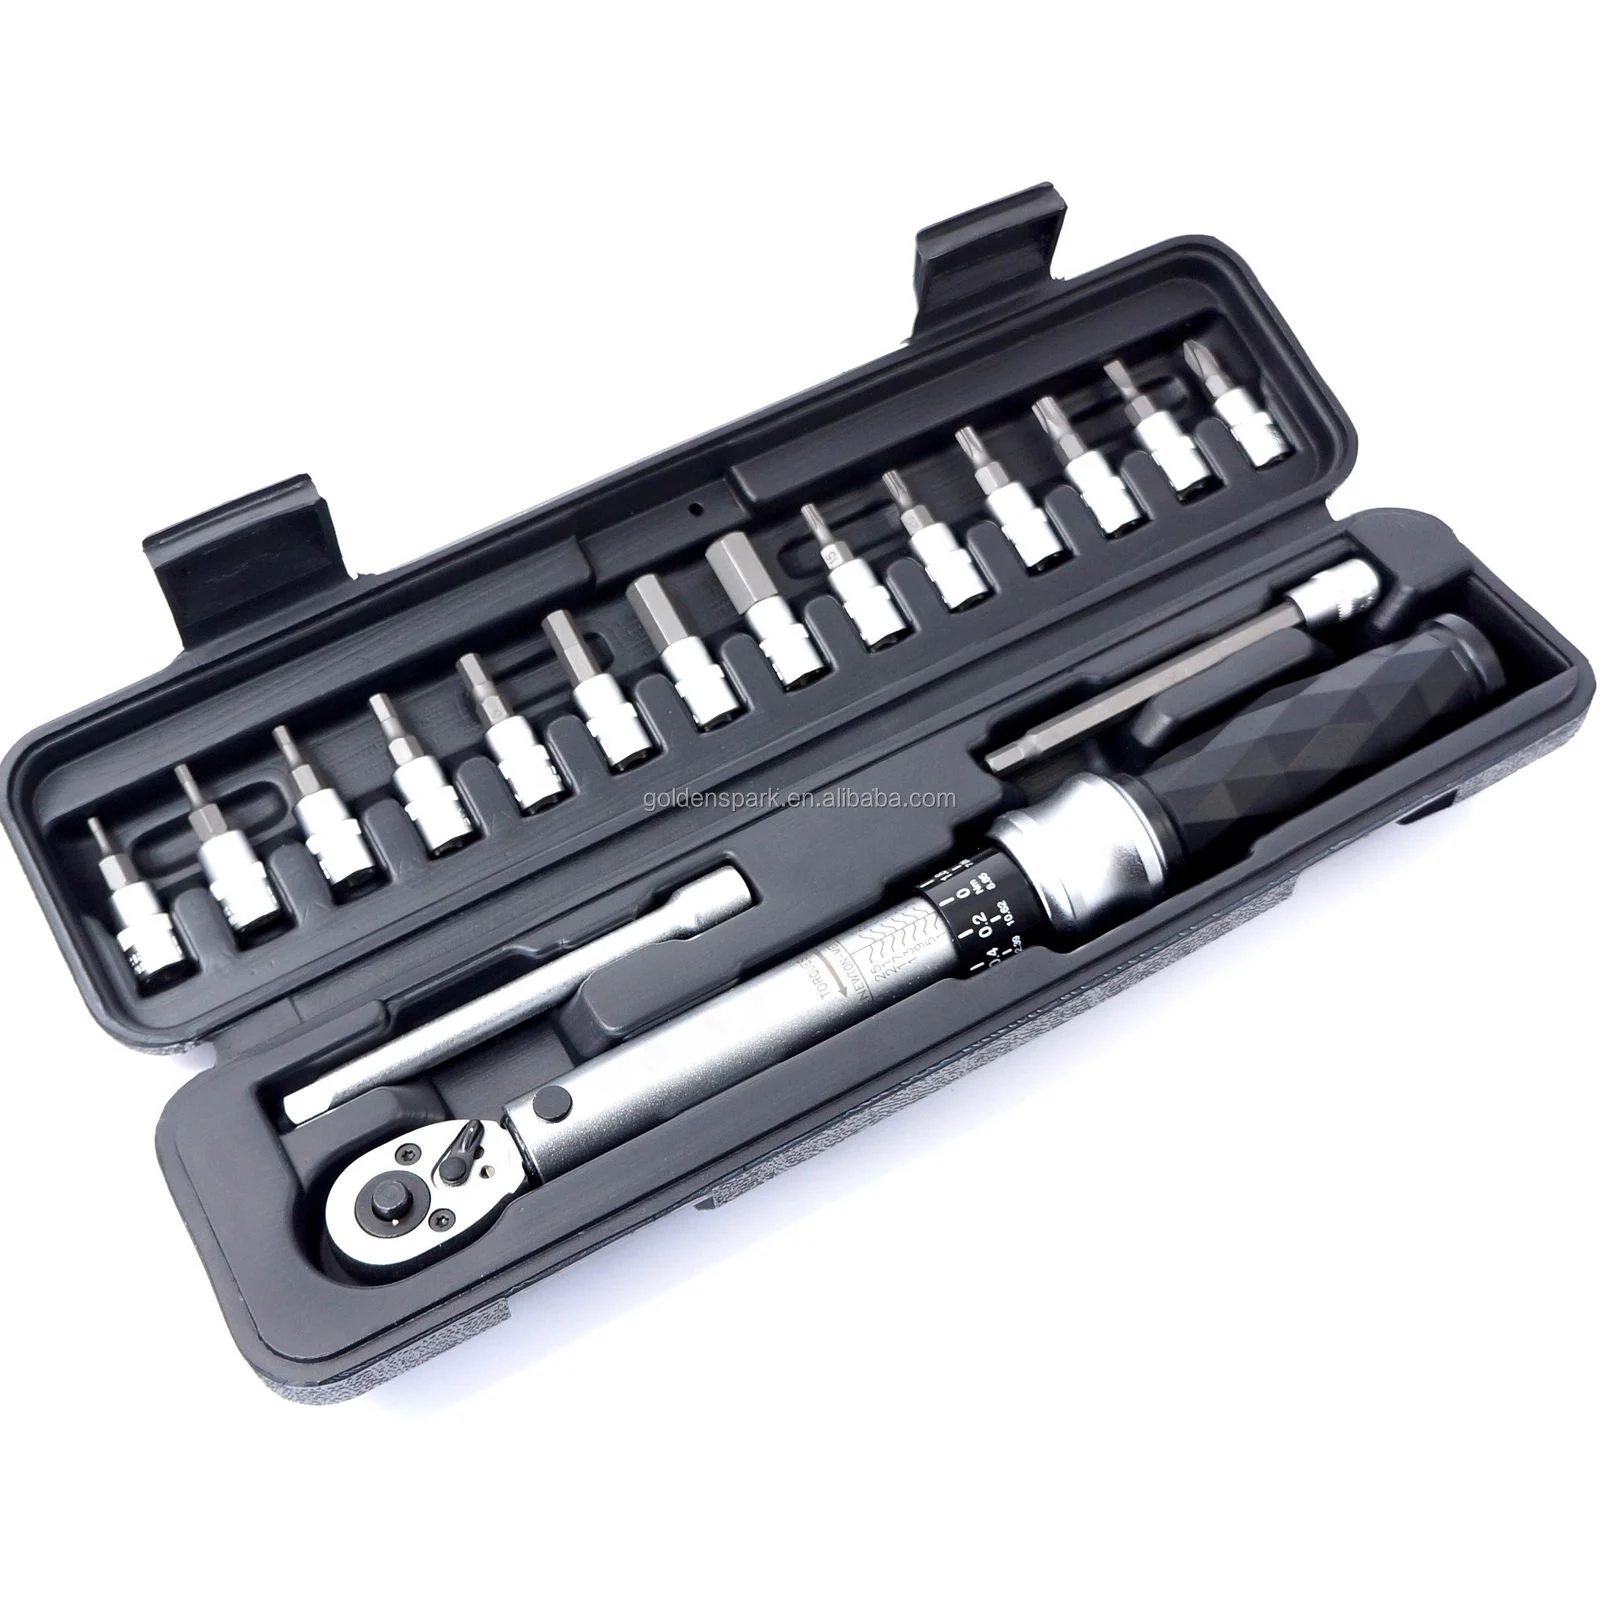 1/4-inch Drive Click Torque Wrench Sets 72-tooth 1-25NM Bicycle Repair Tools Kit